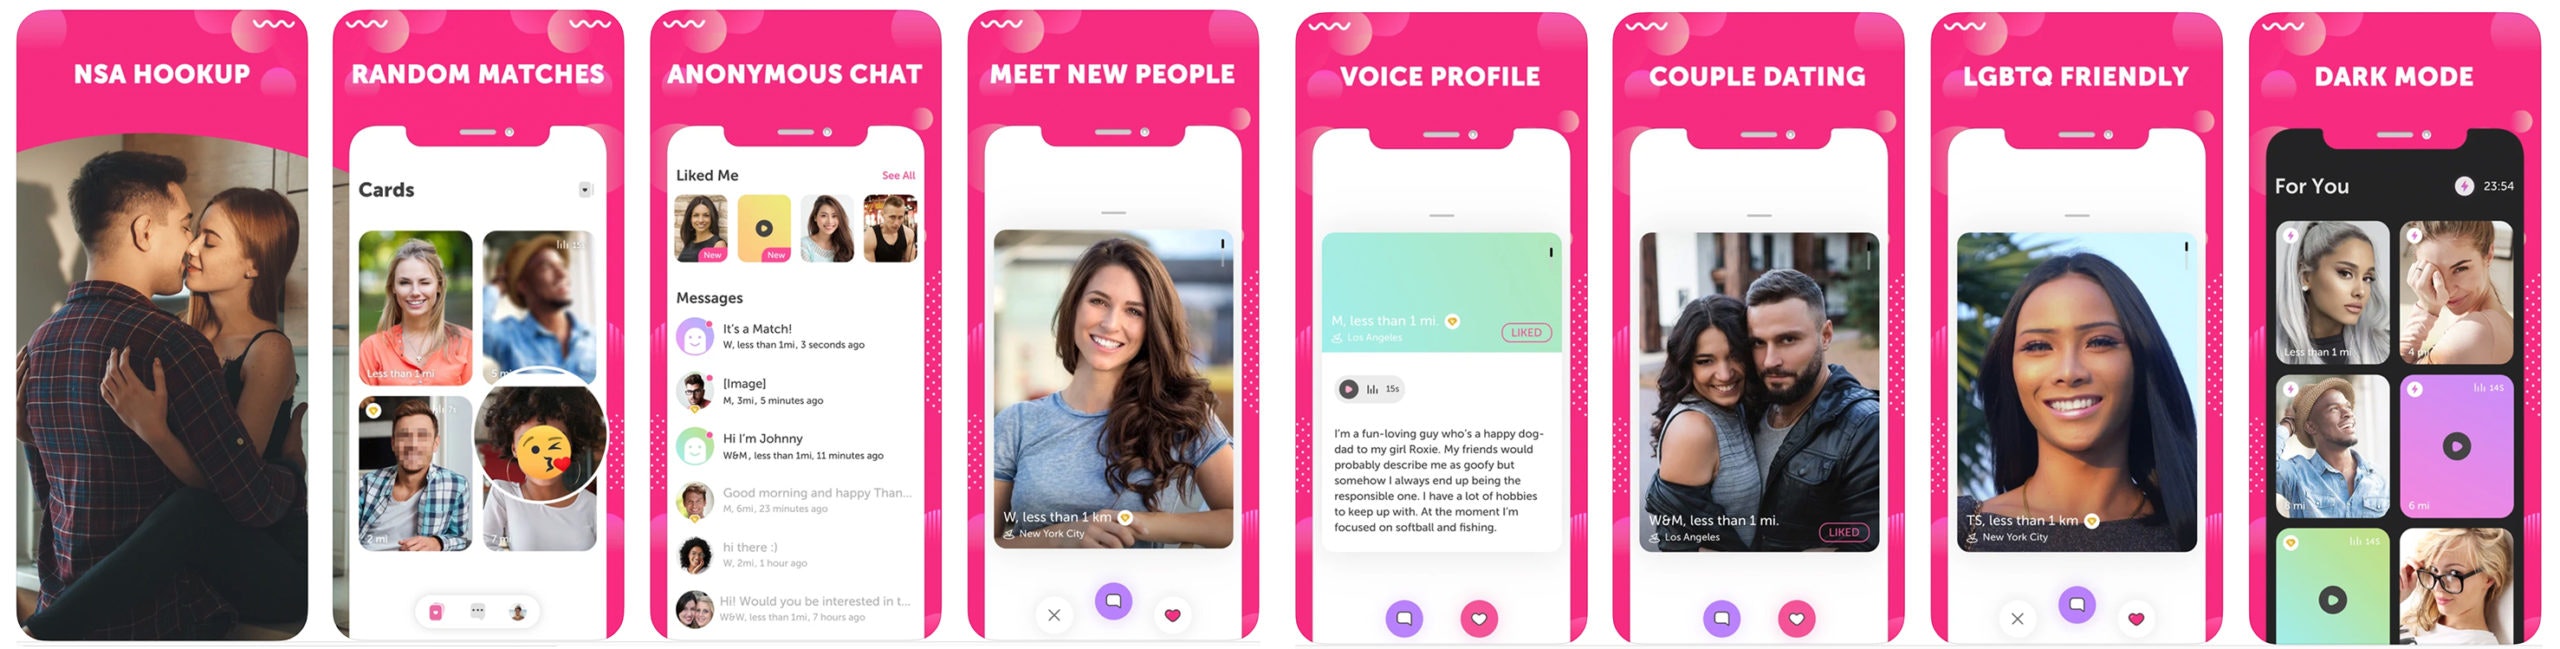 Screenshots from the Yumi app. Shows profile stats (biography, voice notes, user photos) as well as couple and LGBTQ dating options.